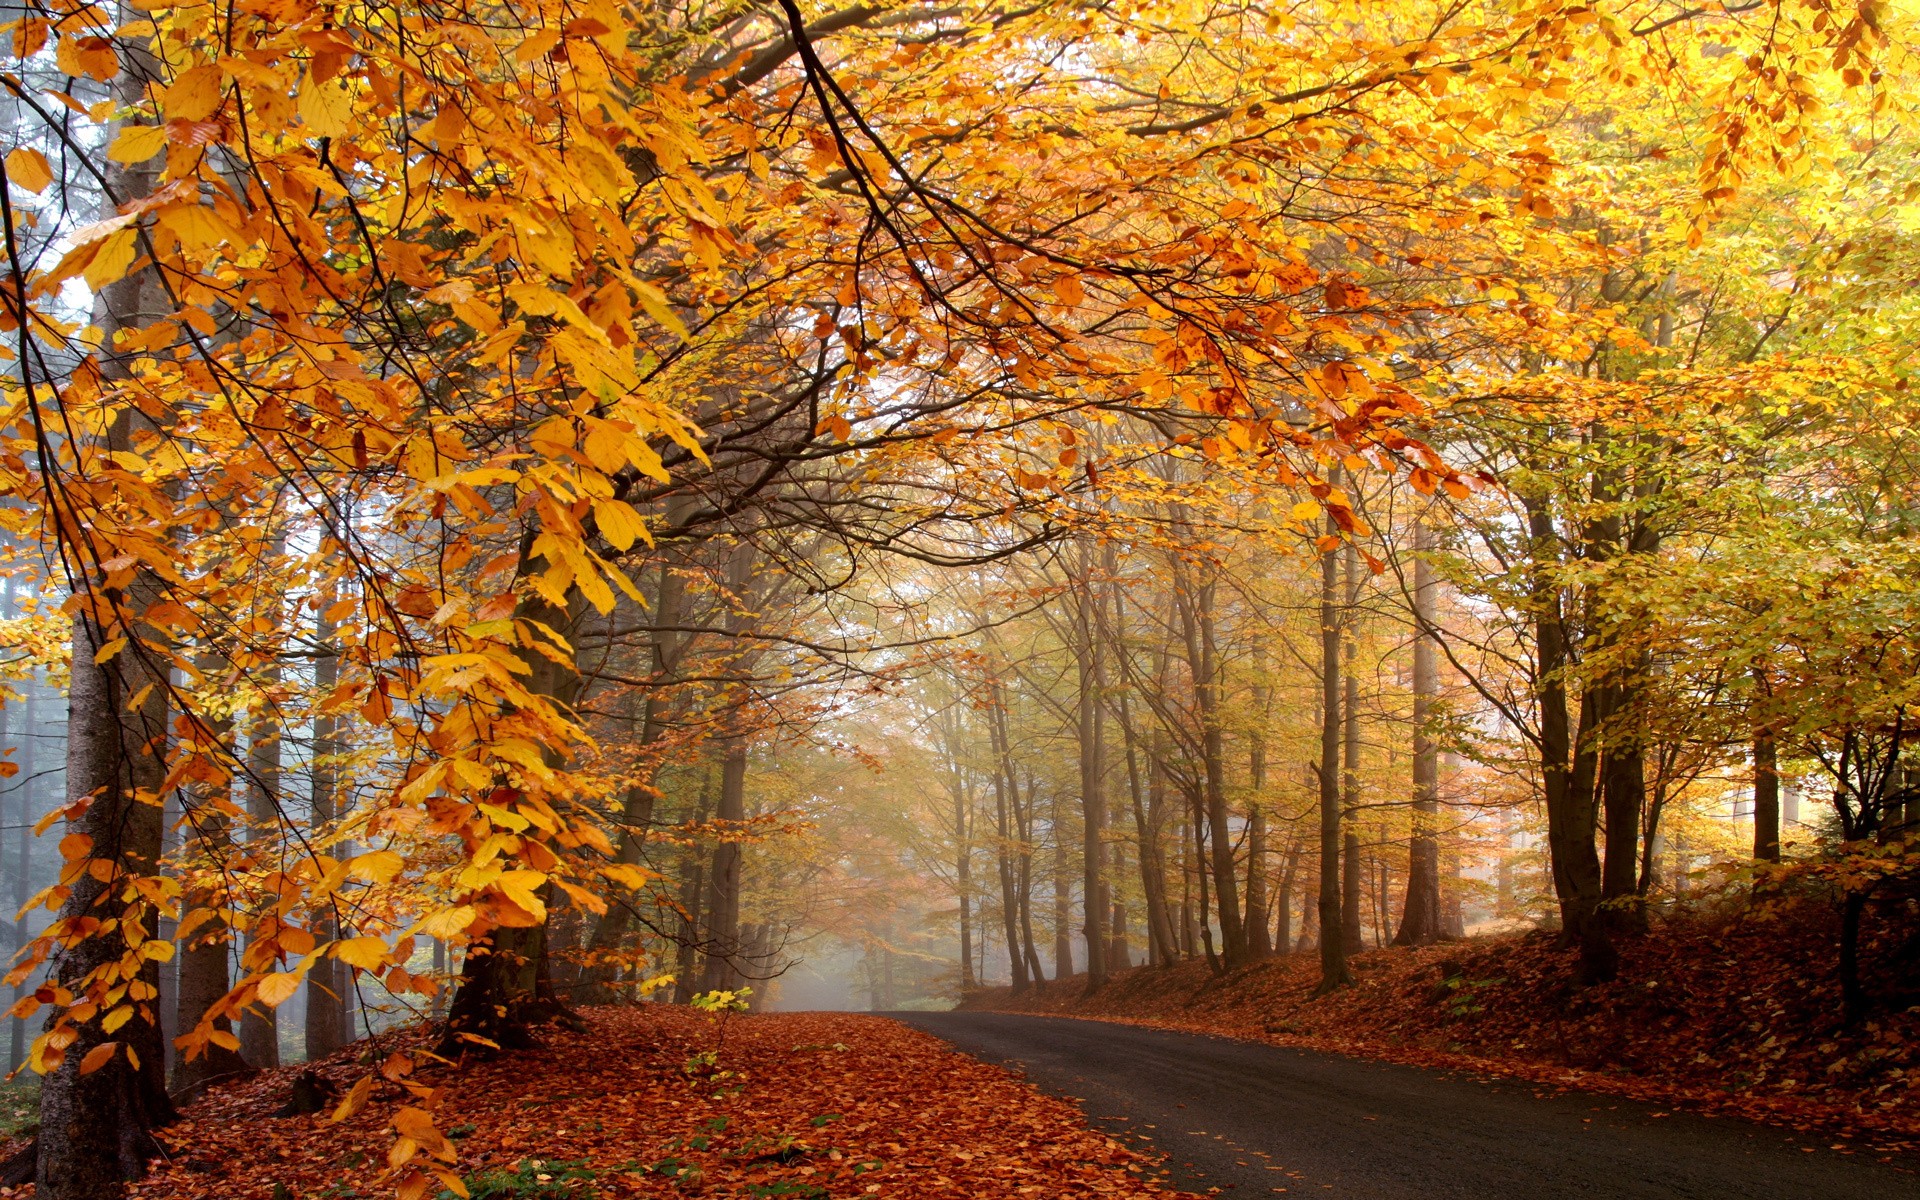 General 1920x1200 nature forest trees mist road fall leaves outdoors plants